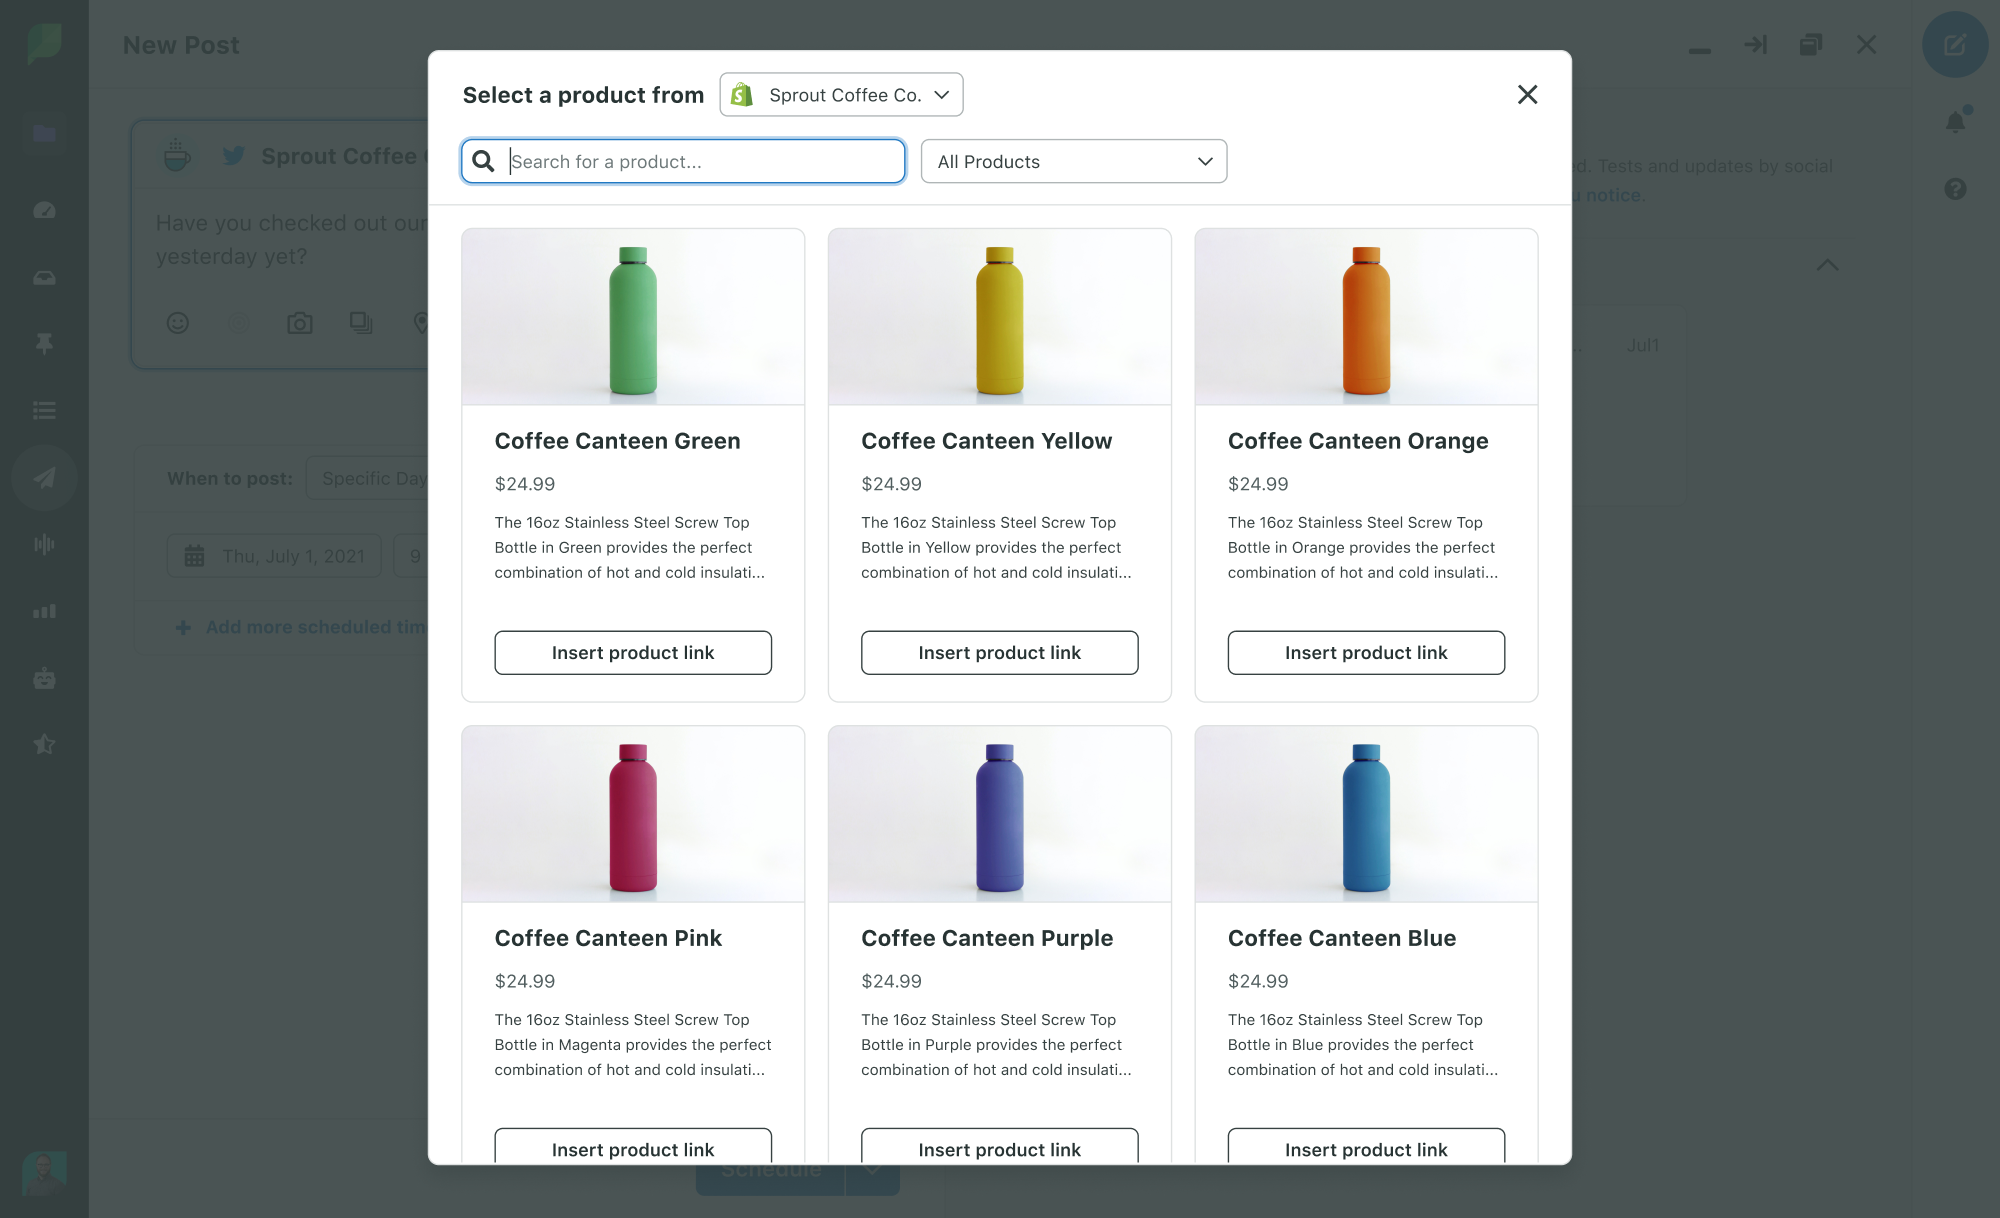 A screenshot of Sprout Social's Shopify integration. In the image, you can see the images and prices of different coffee canteens. 